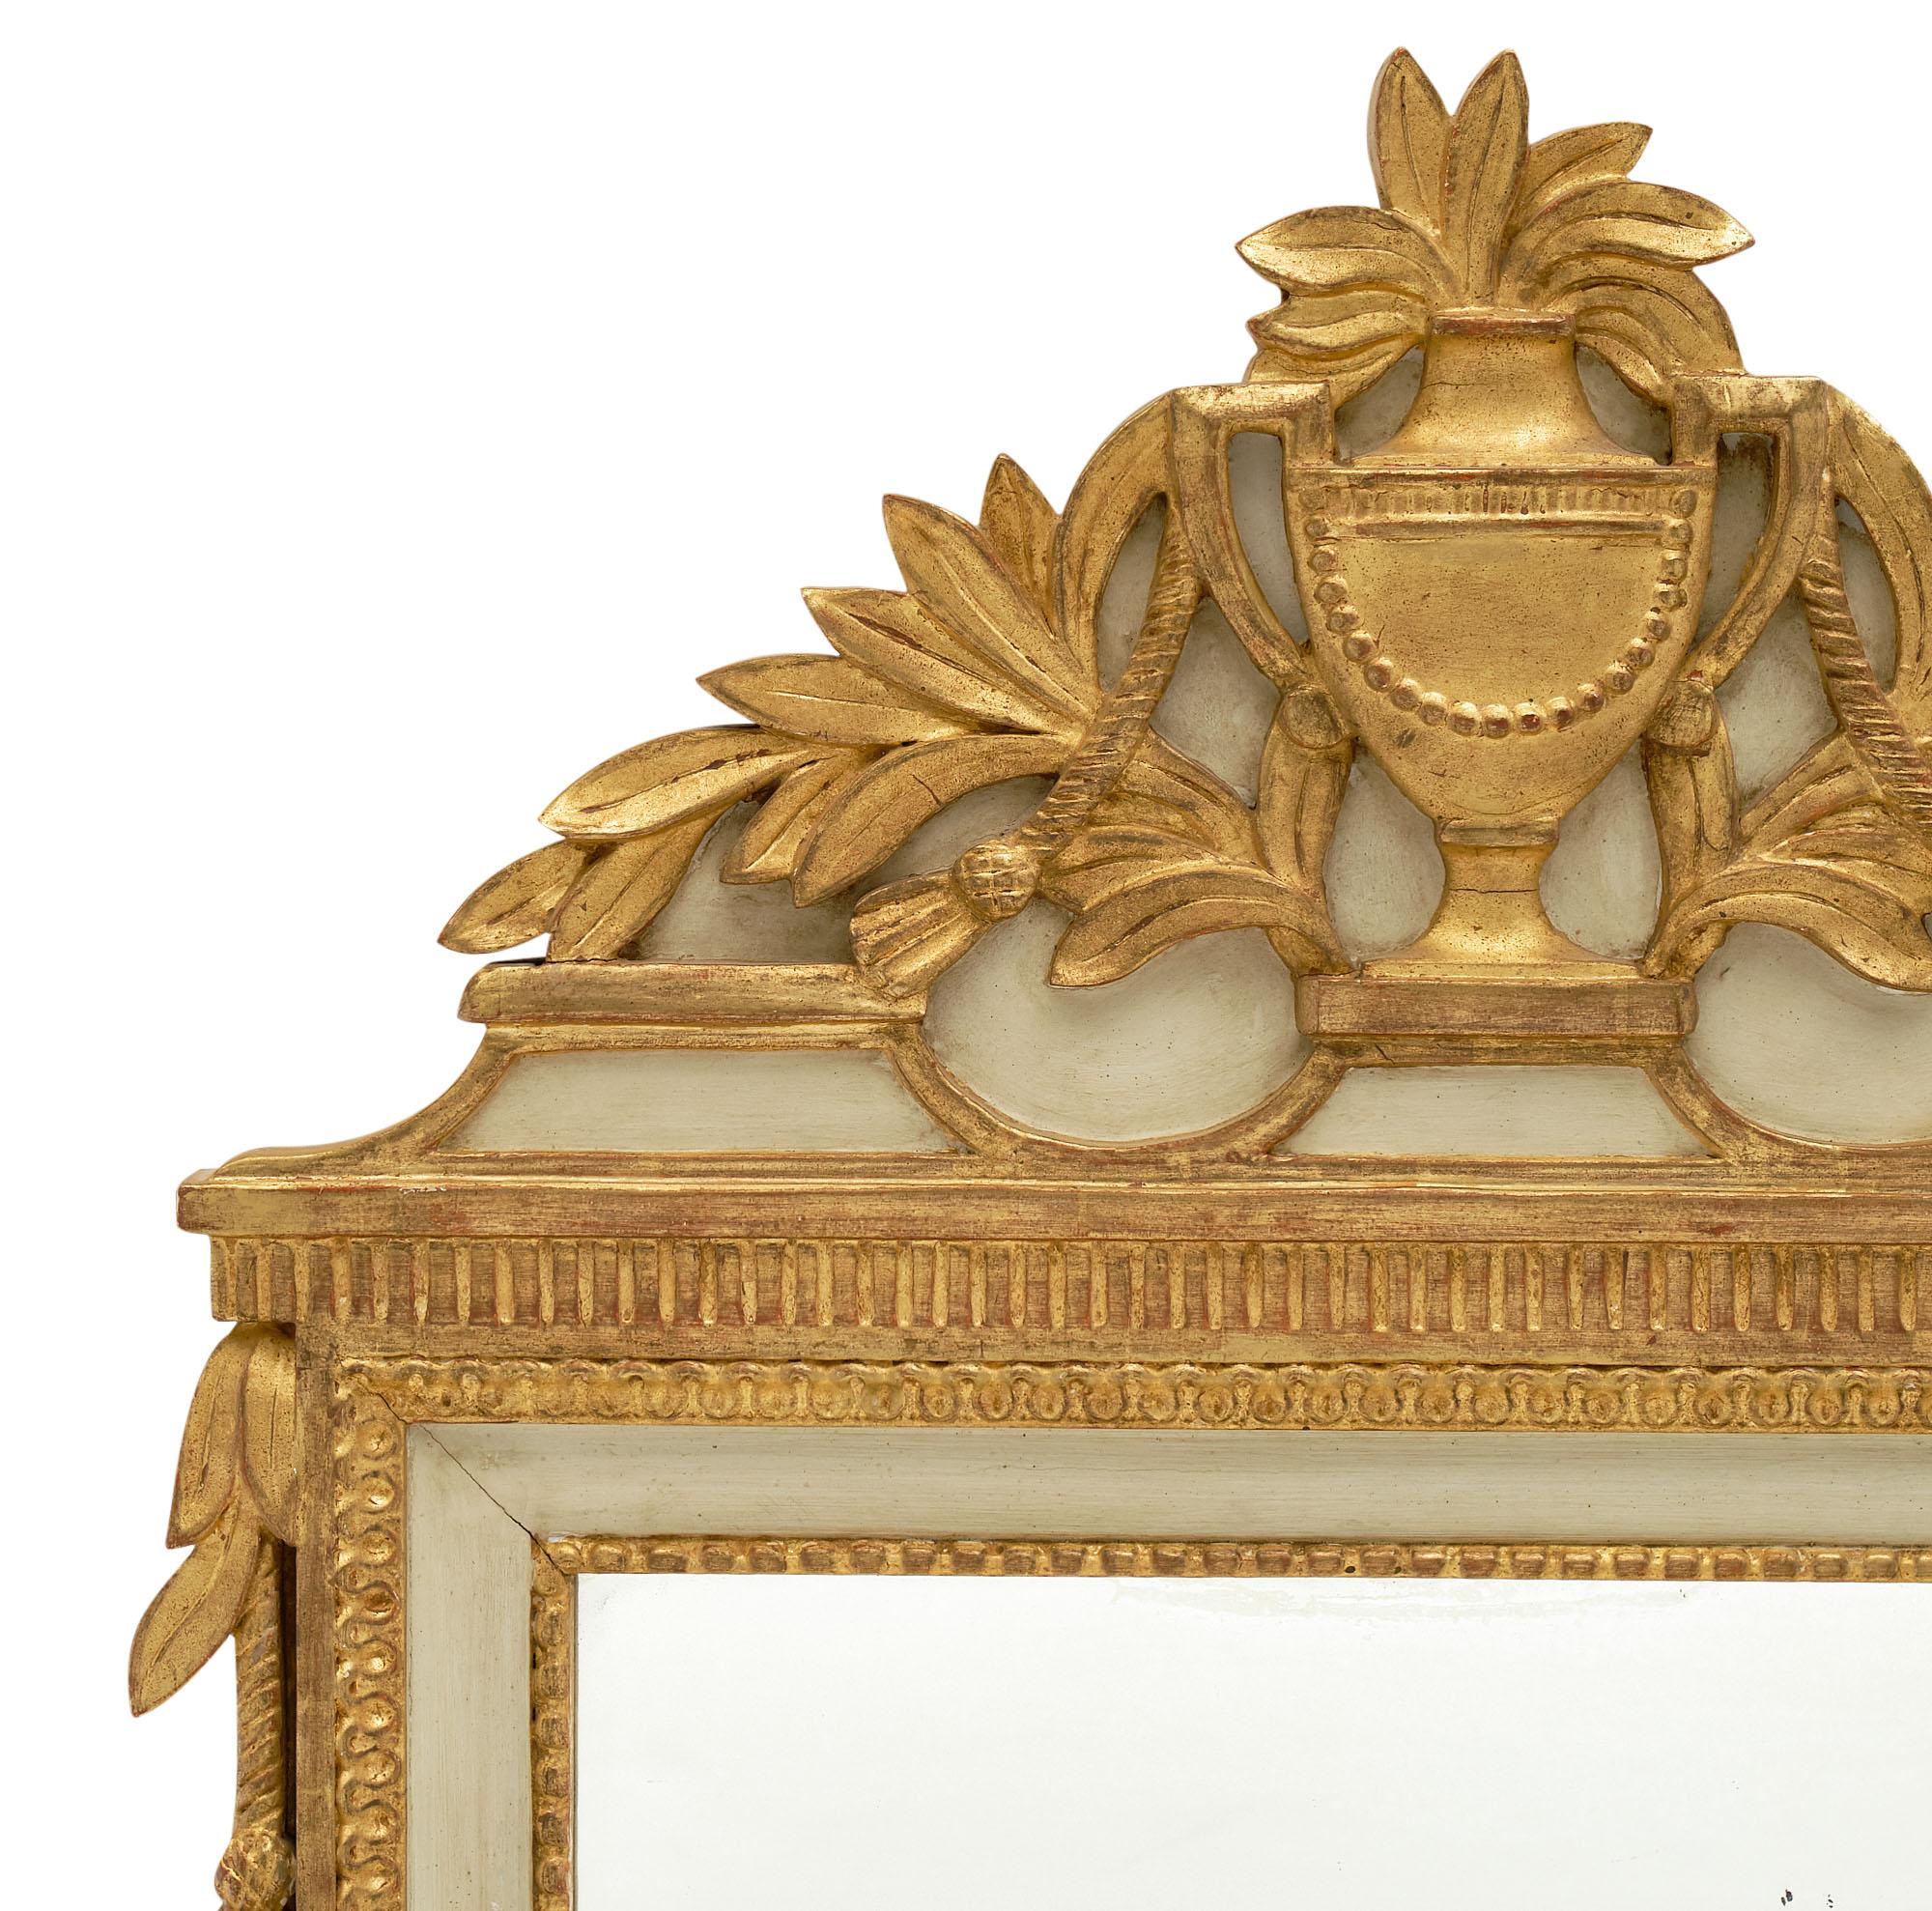 Louis XVI style French antique mirror with intricate decor of a classical urn and laurel branches. The 23 carat gold leaf and original light almond green paint finish give this such a classic and beautiful look. It is all original.